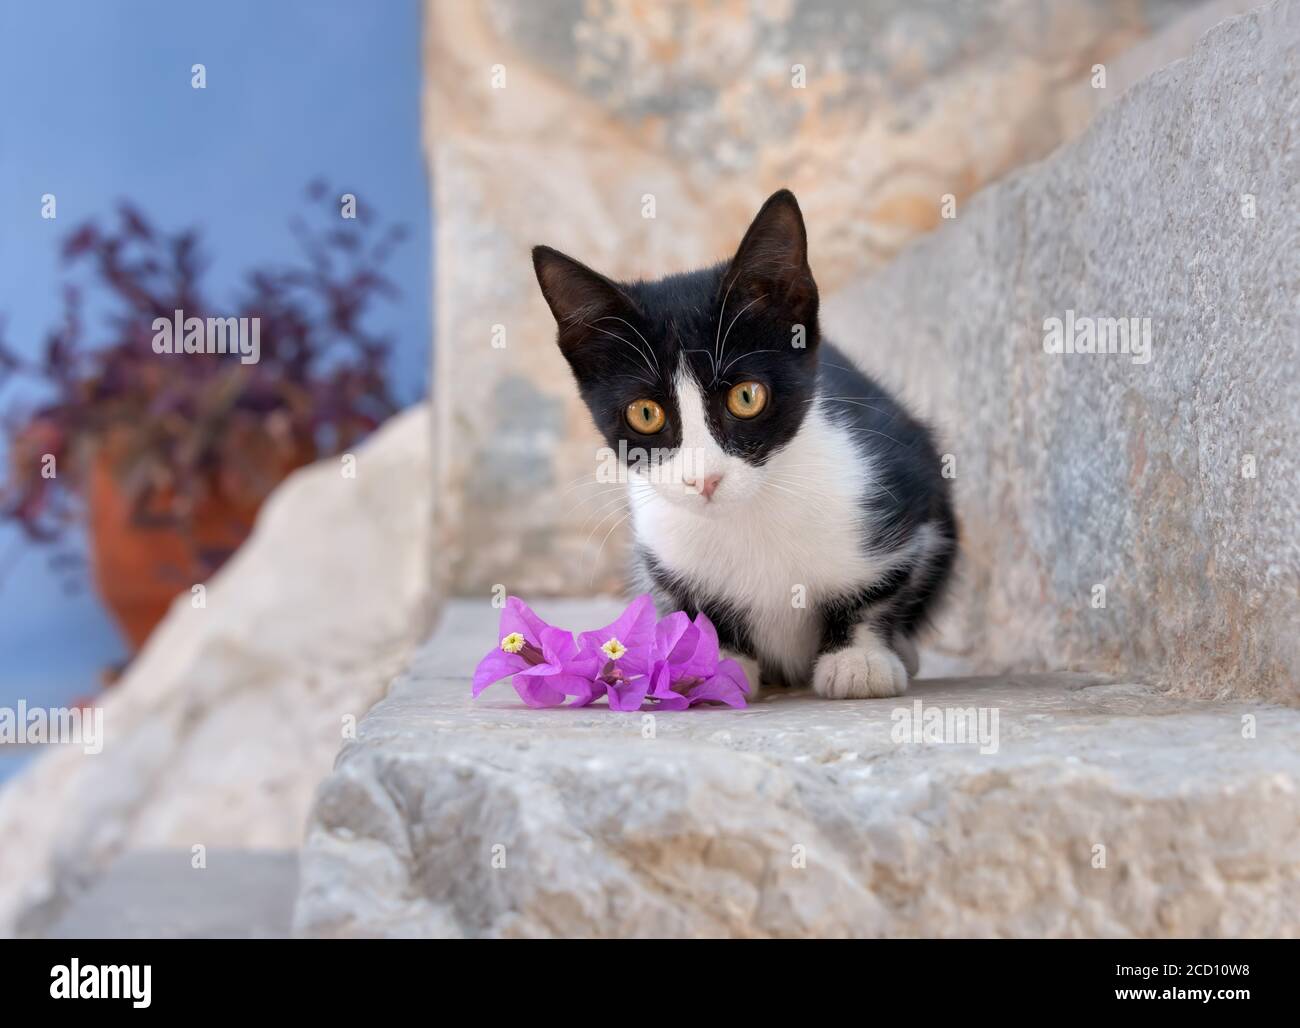 A cute little cat kitten,bicolor black and white, posing on a stony step with blossoms and looking curiously, Greek island Symi, Dodecanese, Greece Stock Photo